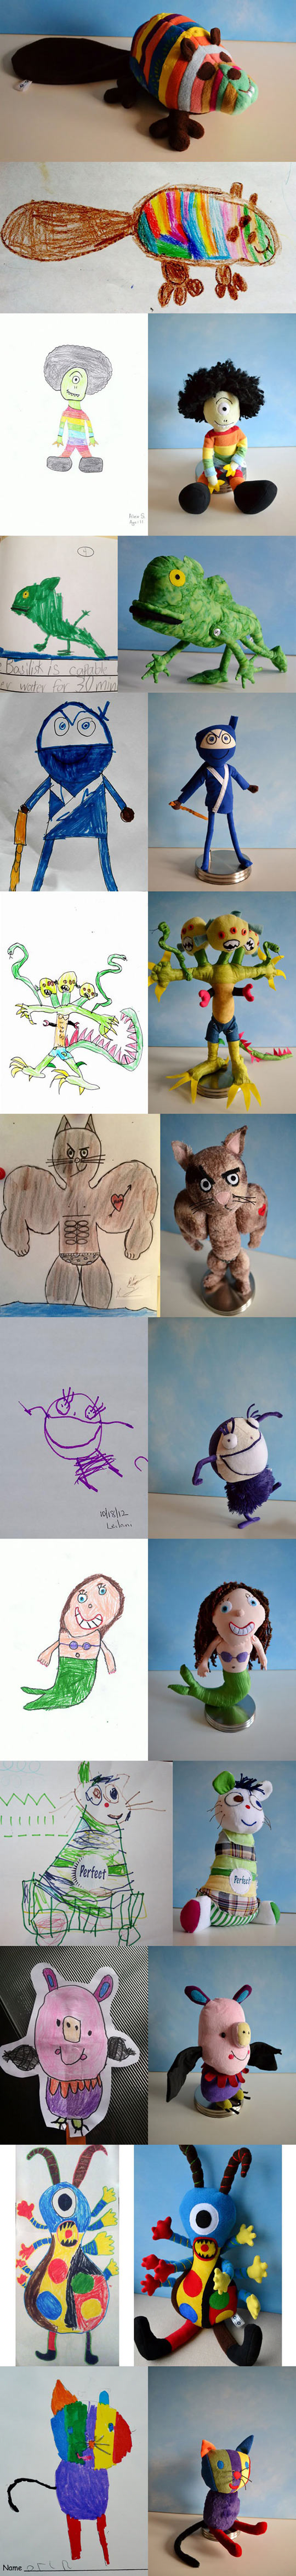 funny-kids-drawing-made-plush-toys